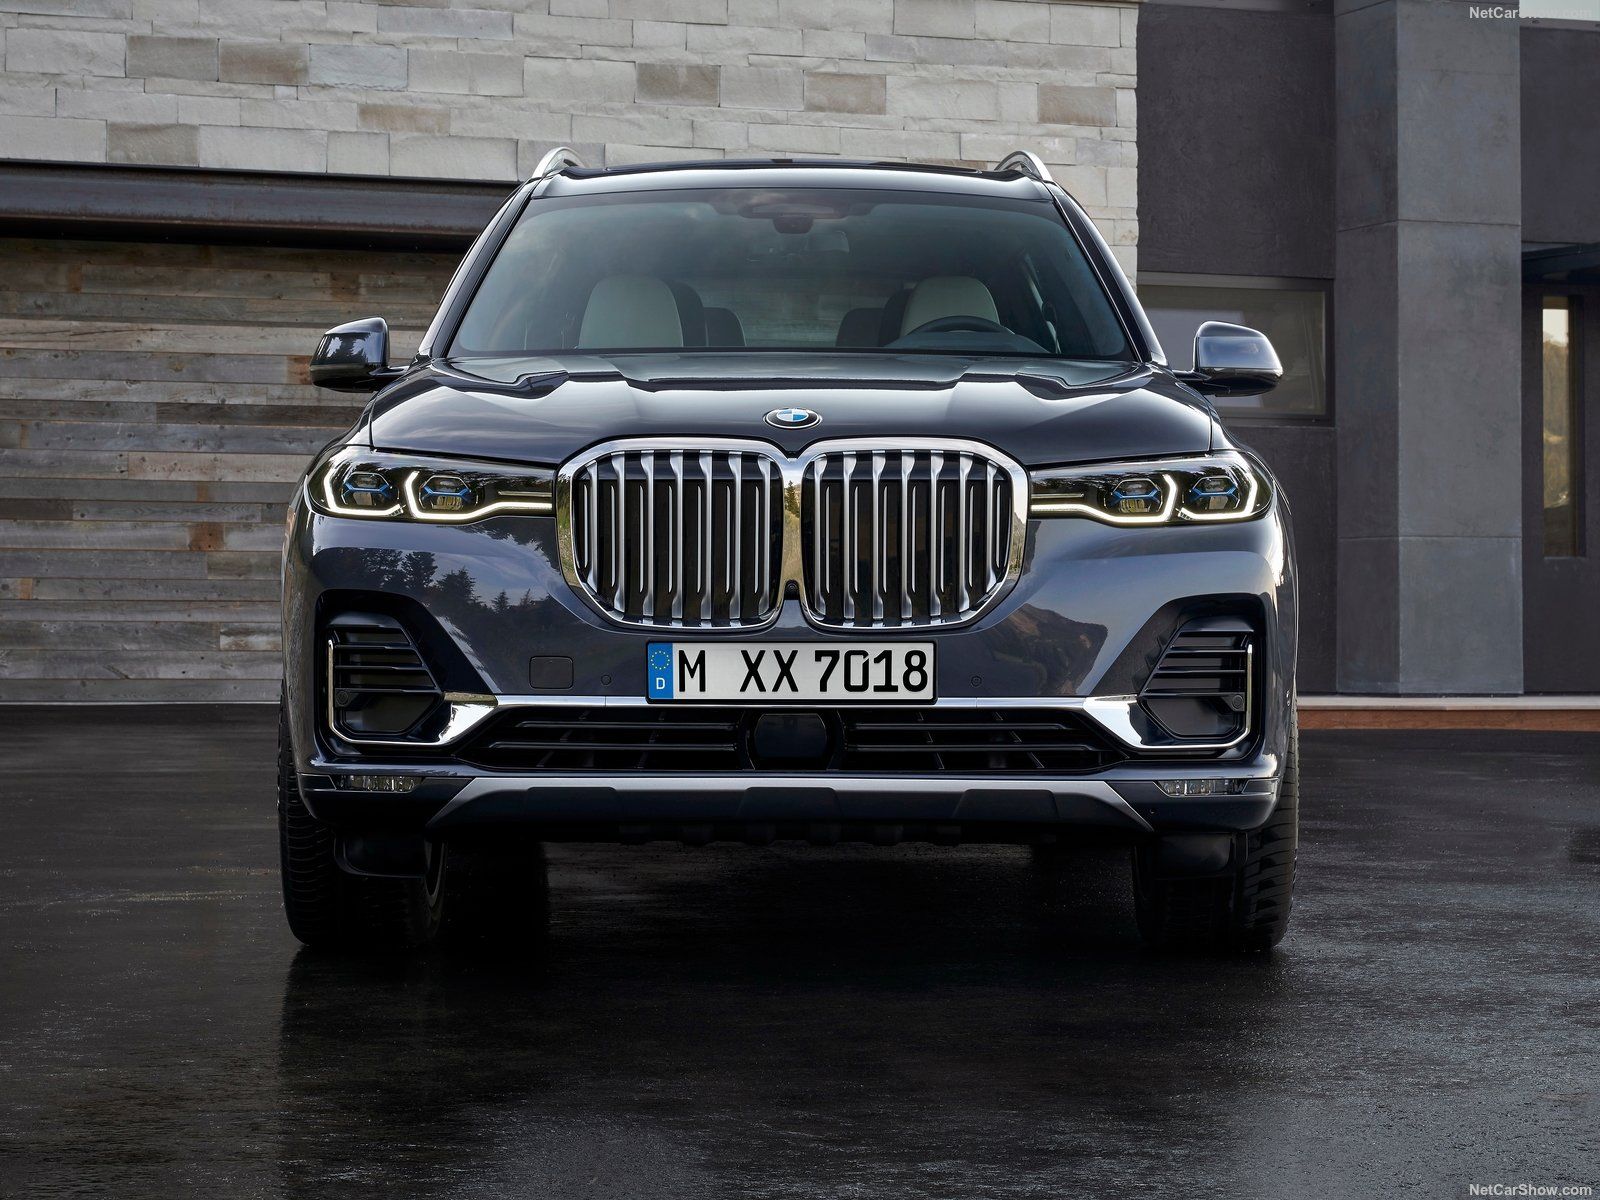 BMW X7 picture. BMW photo gallery